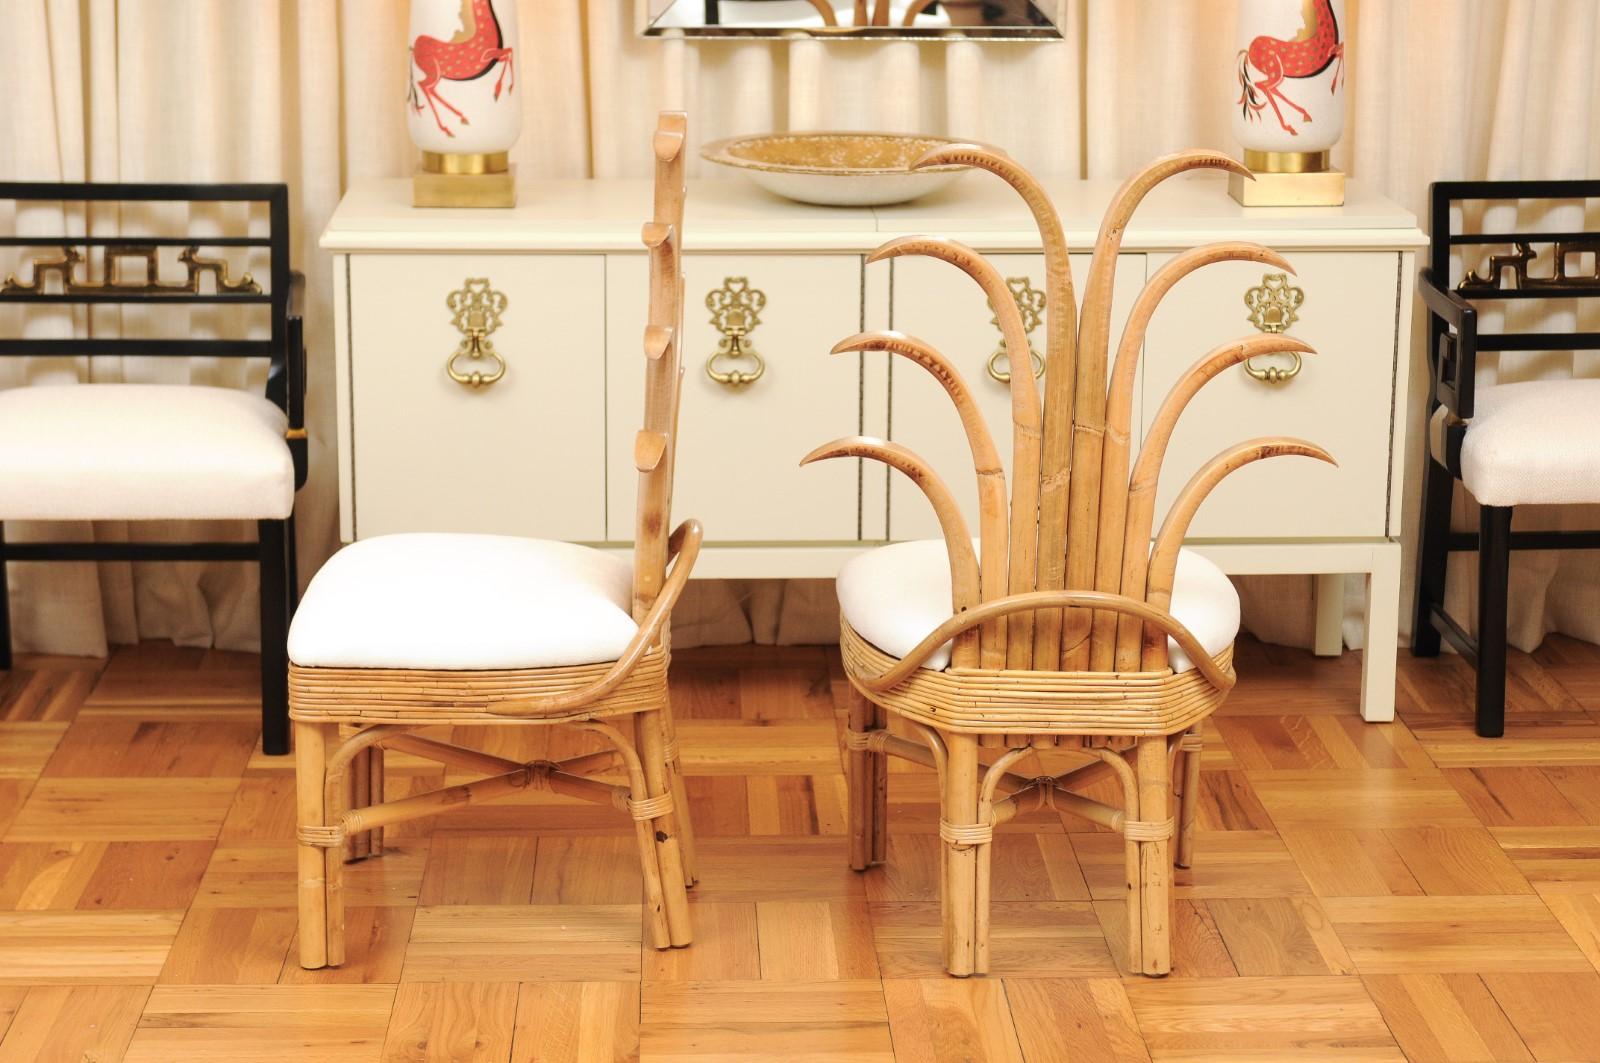 Exquisite Set of 10 Rattan and Cane Palm Frond Dining Chairs, circa 1950 For Sale 5